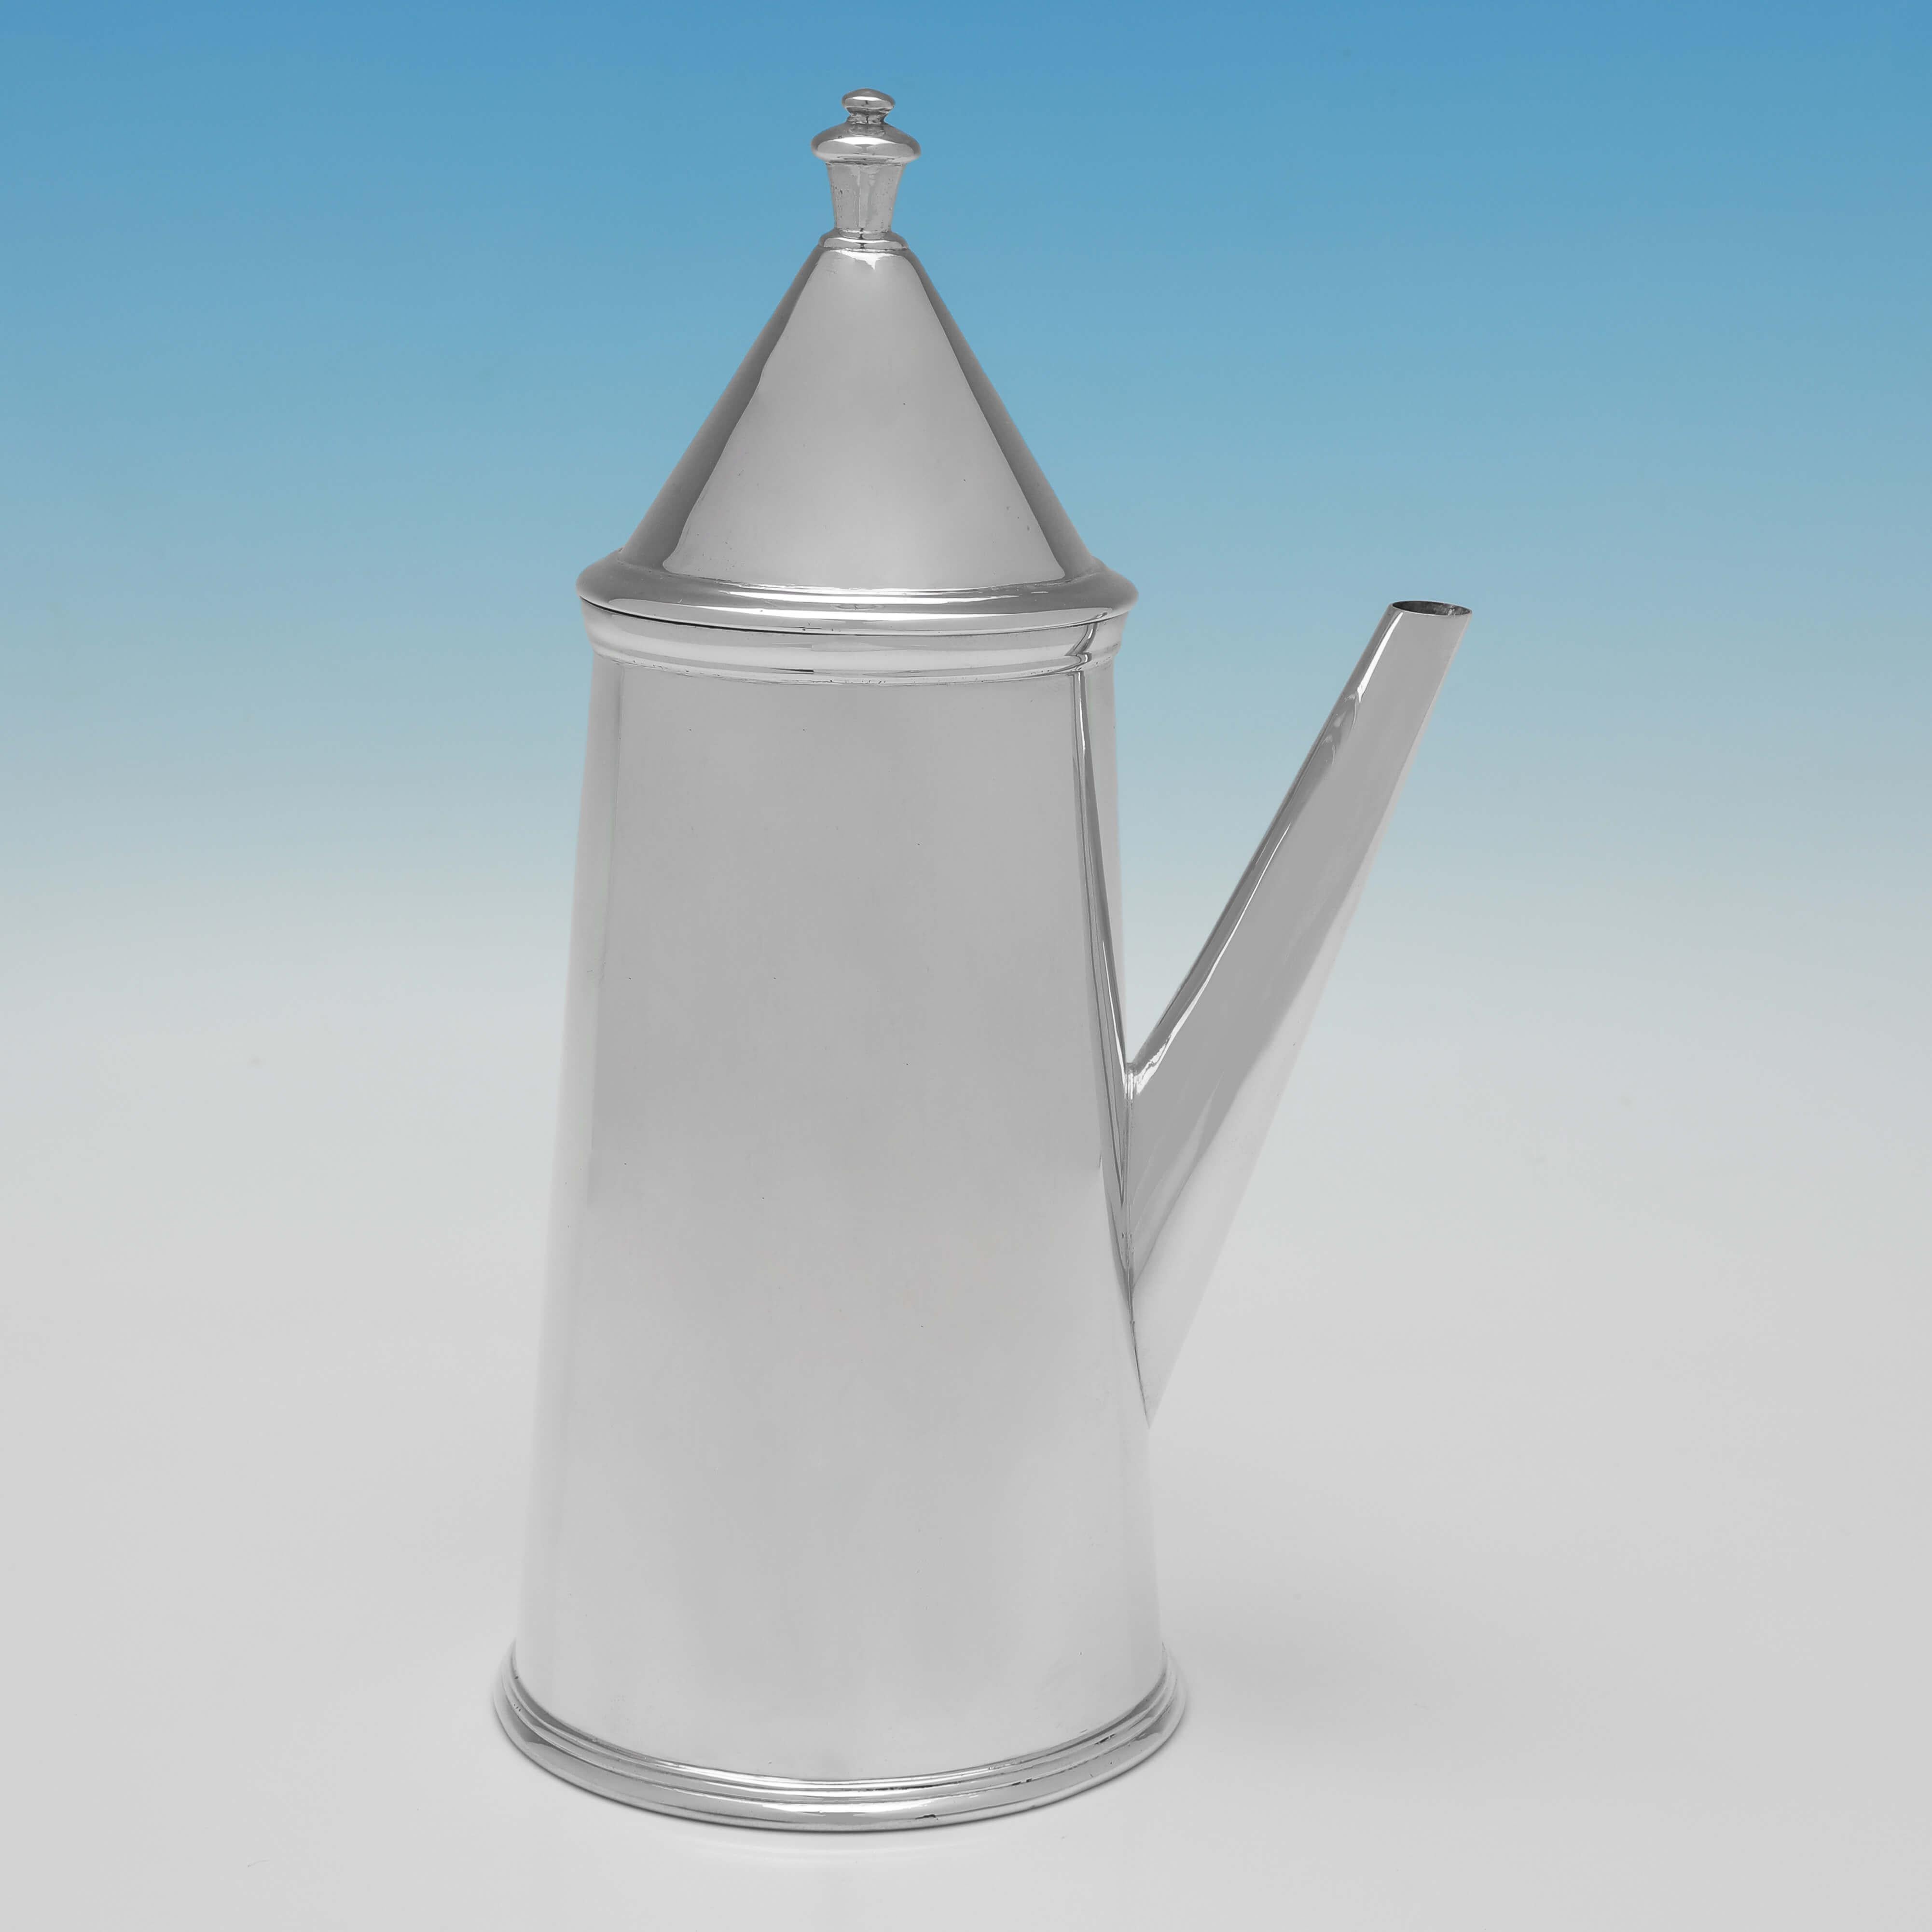 Hallmarked in Chester in 1913 by Nathan & Hayes, this handsome, Antique Sterling Silver Coffee Pot, features a wooden side handle, and a conical lid. 

The coffee pot measures 8.25